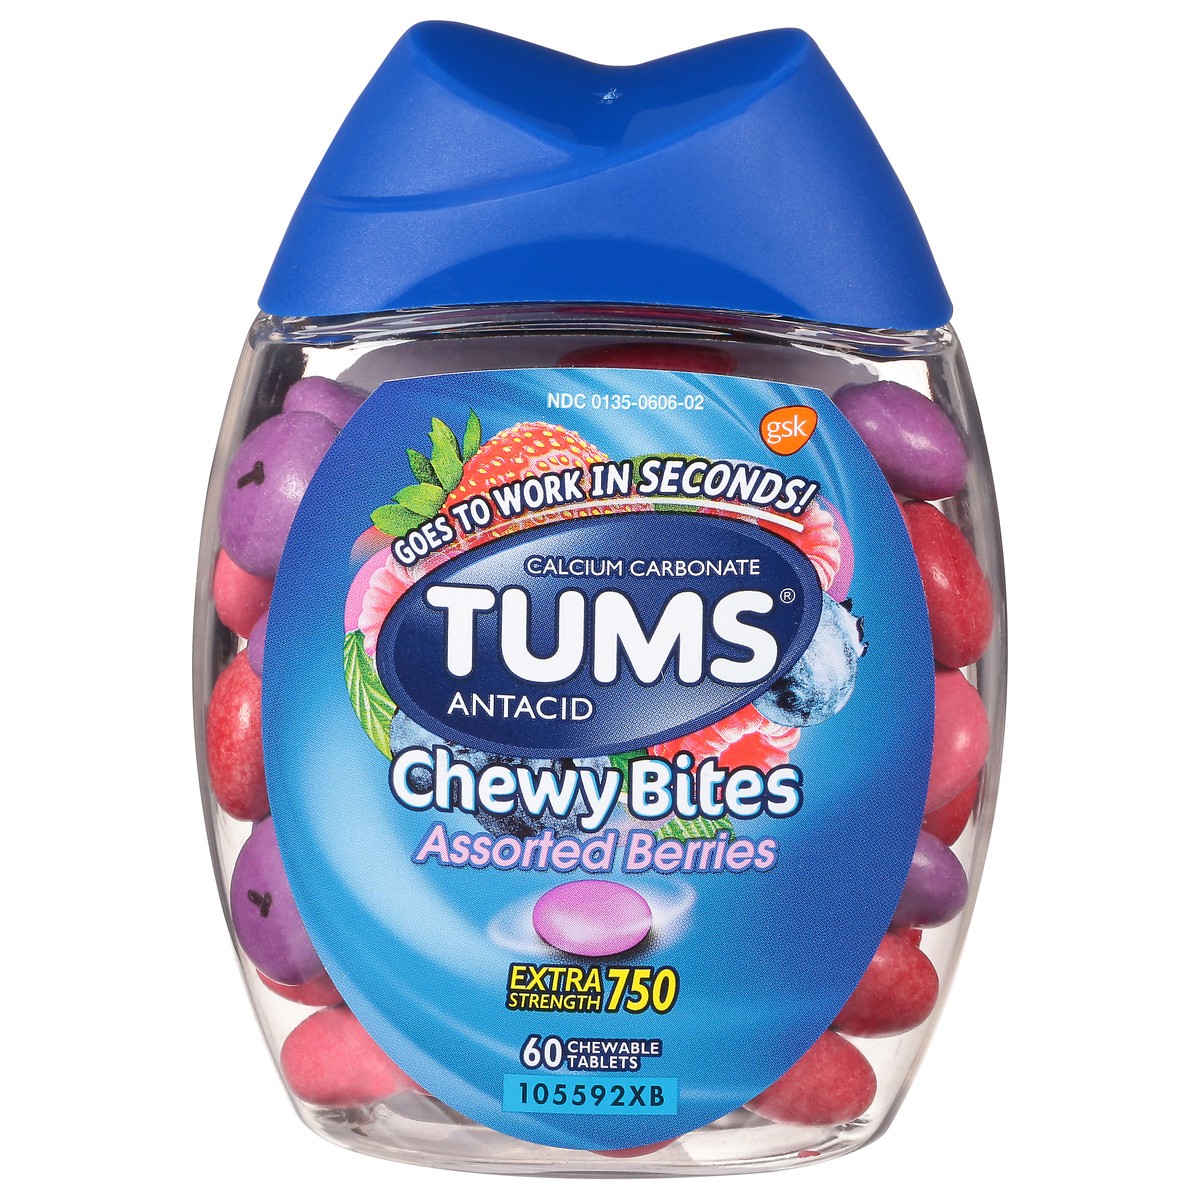 slide 1 of 7, Tums Chewy Bites Assorted Berries Extra Strength 750 Antacid Chewable Tablets 60 ea, 60 ct